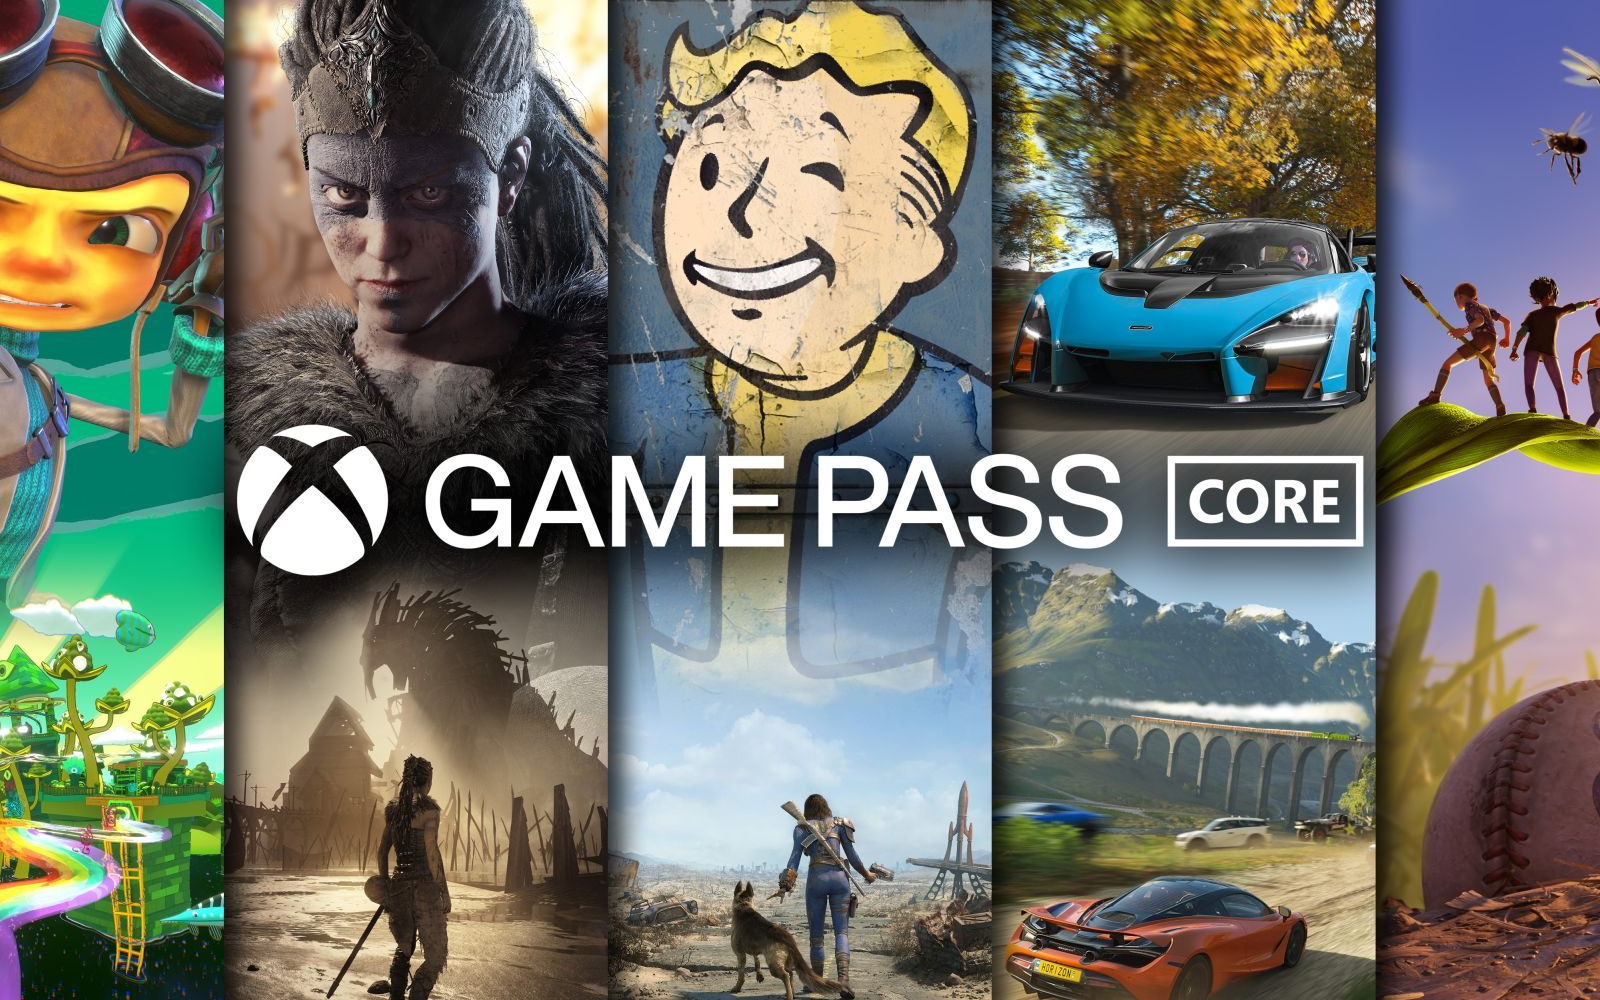 Xbox Live Gold Becoming Xbox Game Pass Core In September